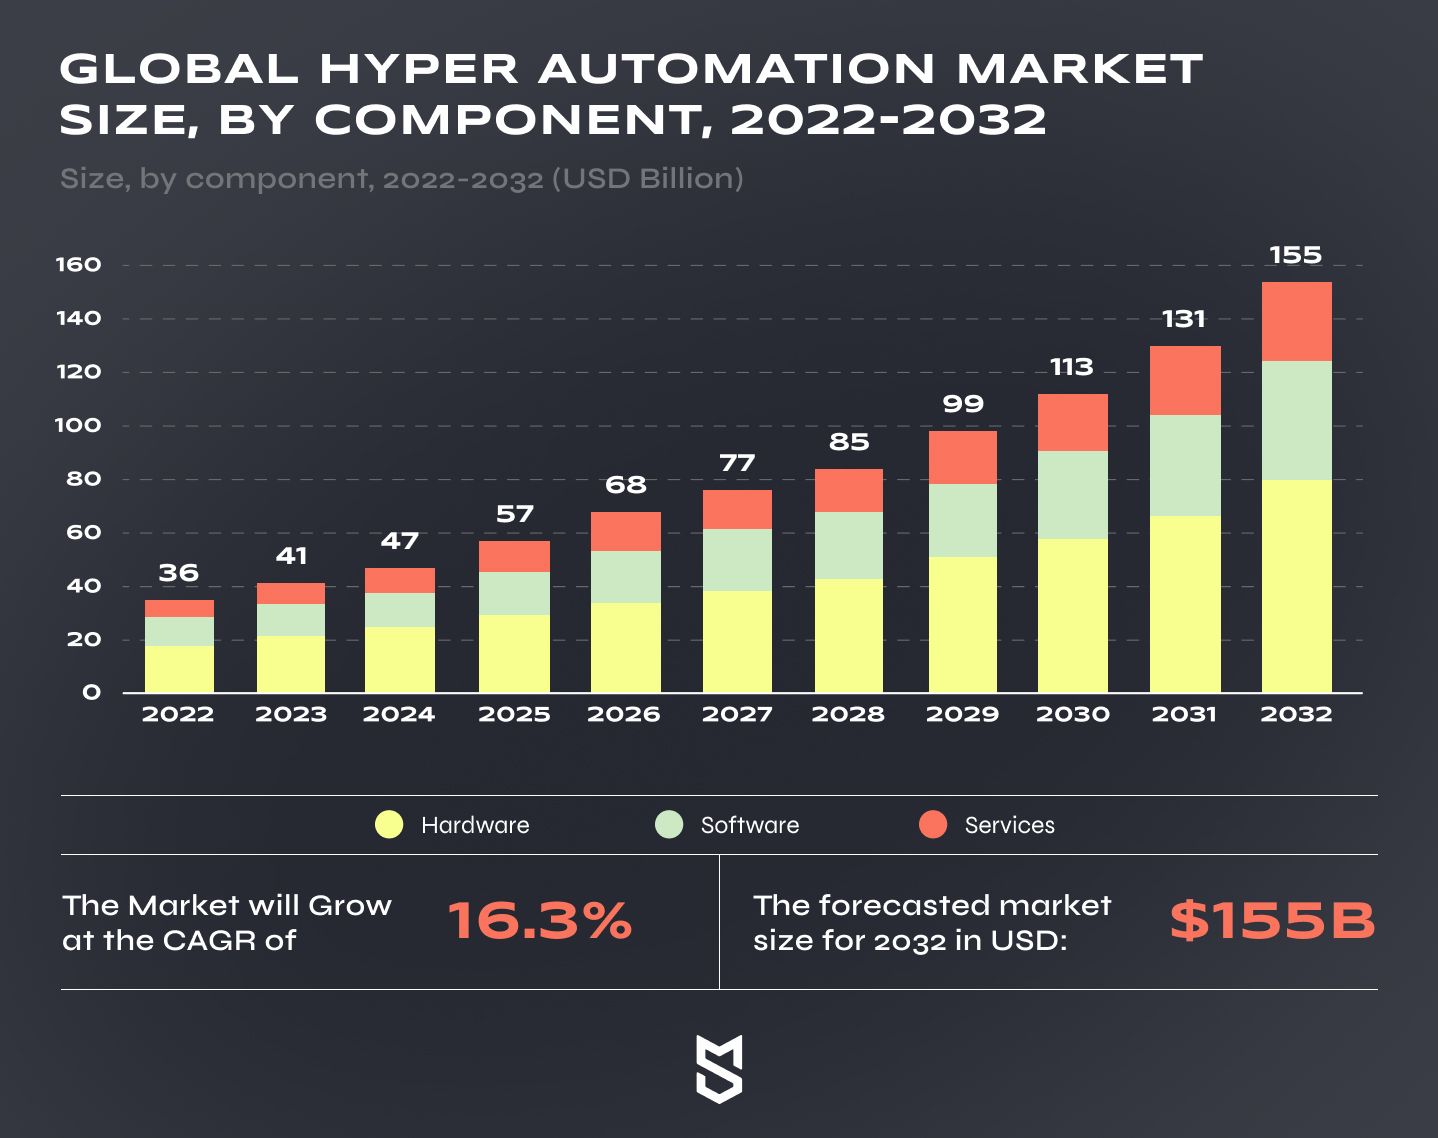 Global Hyper Automation Market Size, by component, 2022-2032